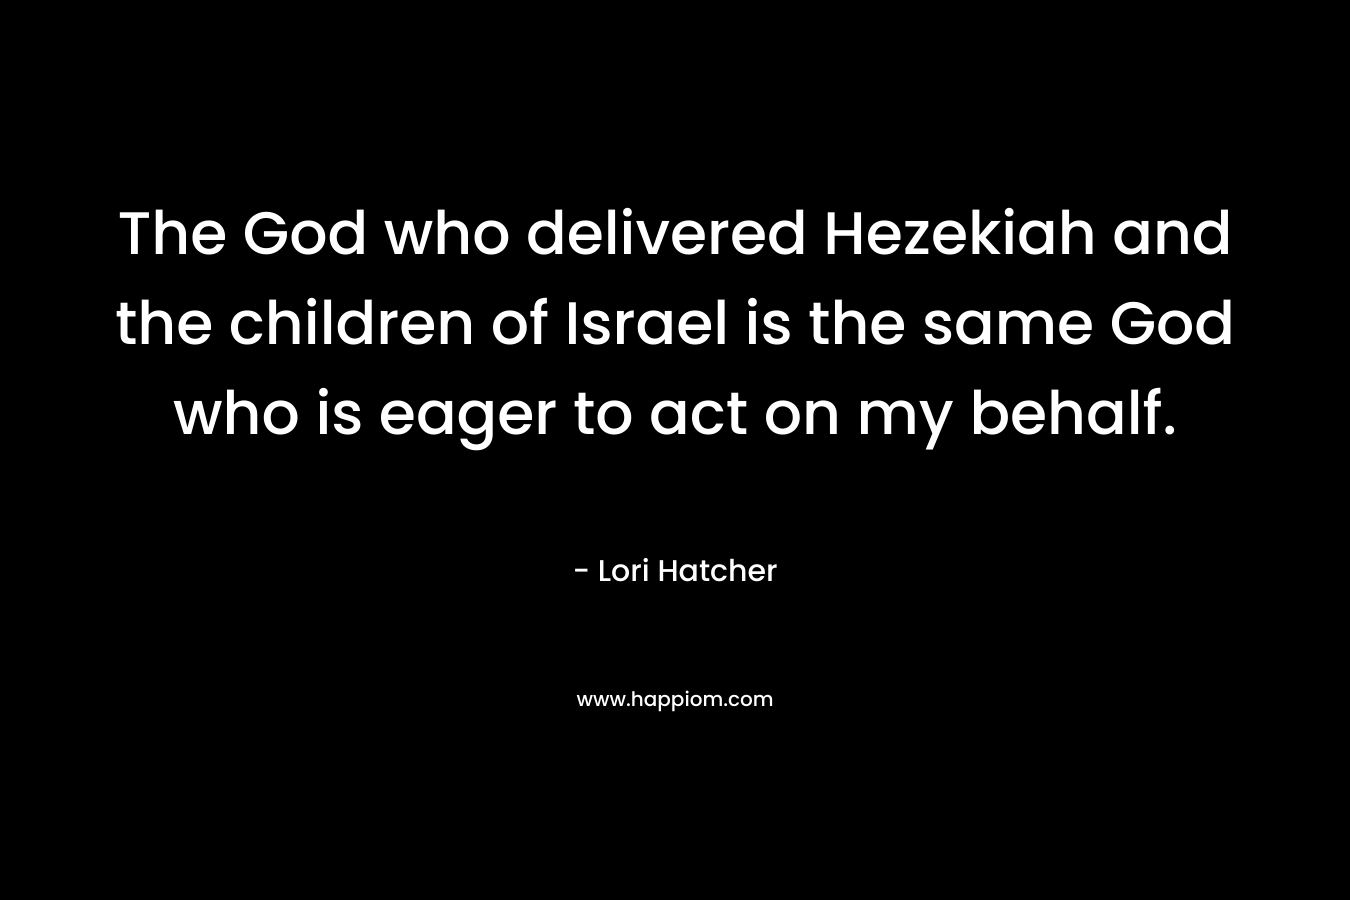 The God who delivered Hezekiah and the children of Israel is the same God who is eager to act on my behalf. – Lori Hatcher